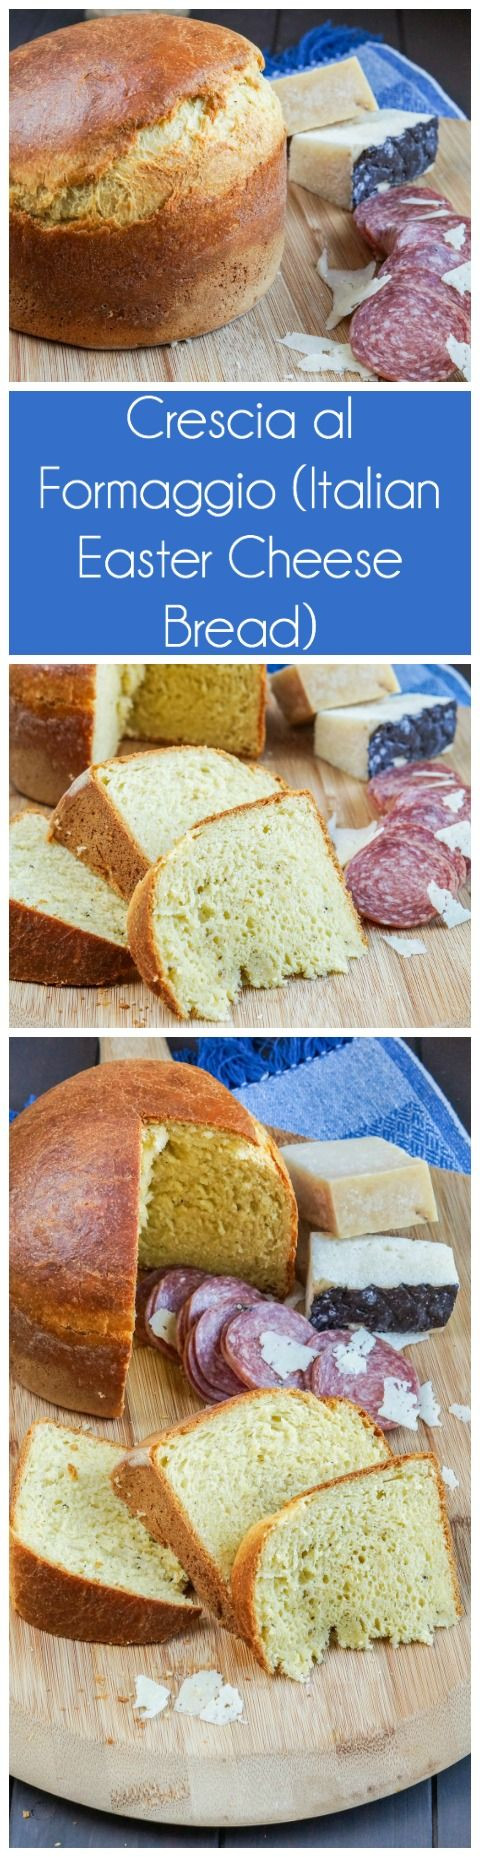 Italian Easter Bread With Meat And Cheese
 Crescia al Formaggio Italian Easter Cheese Bread